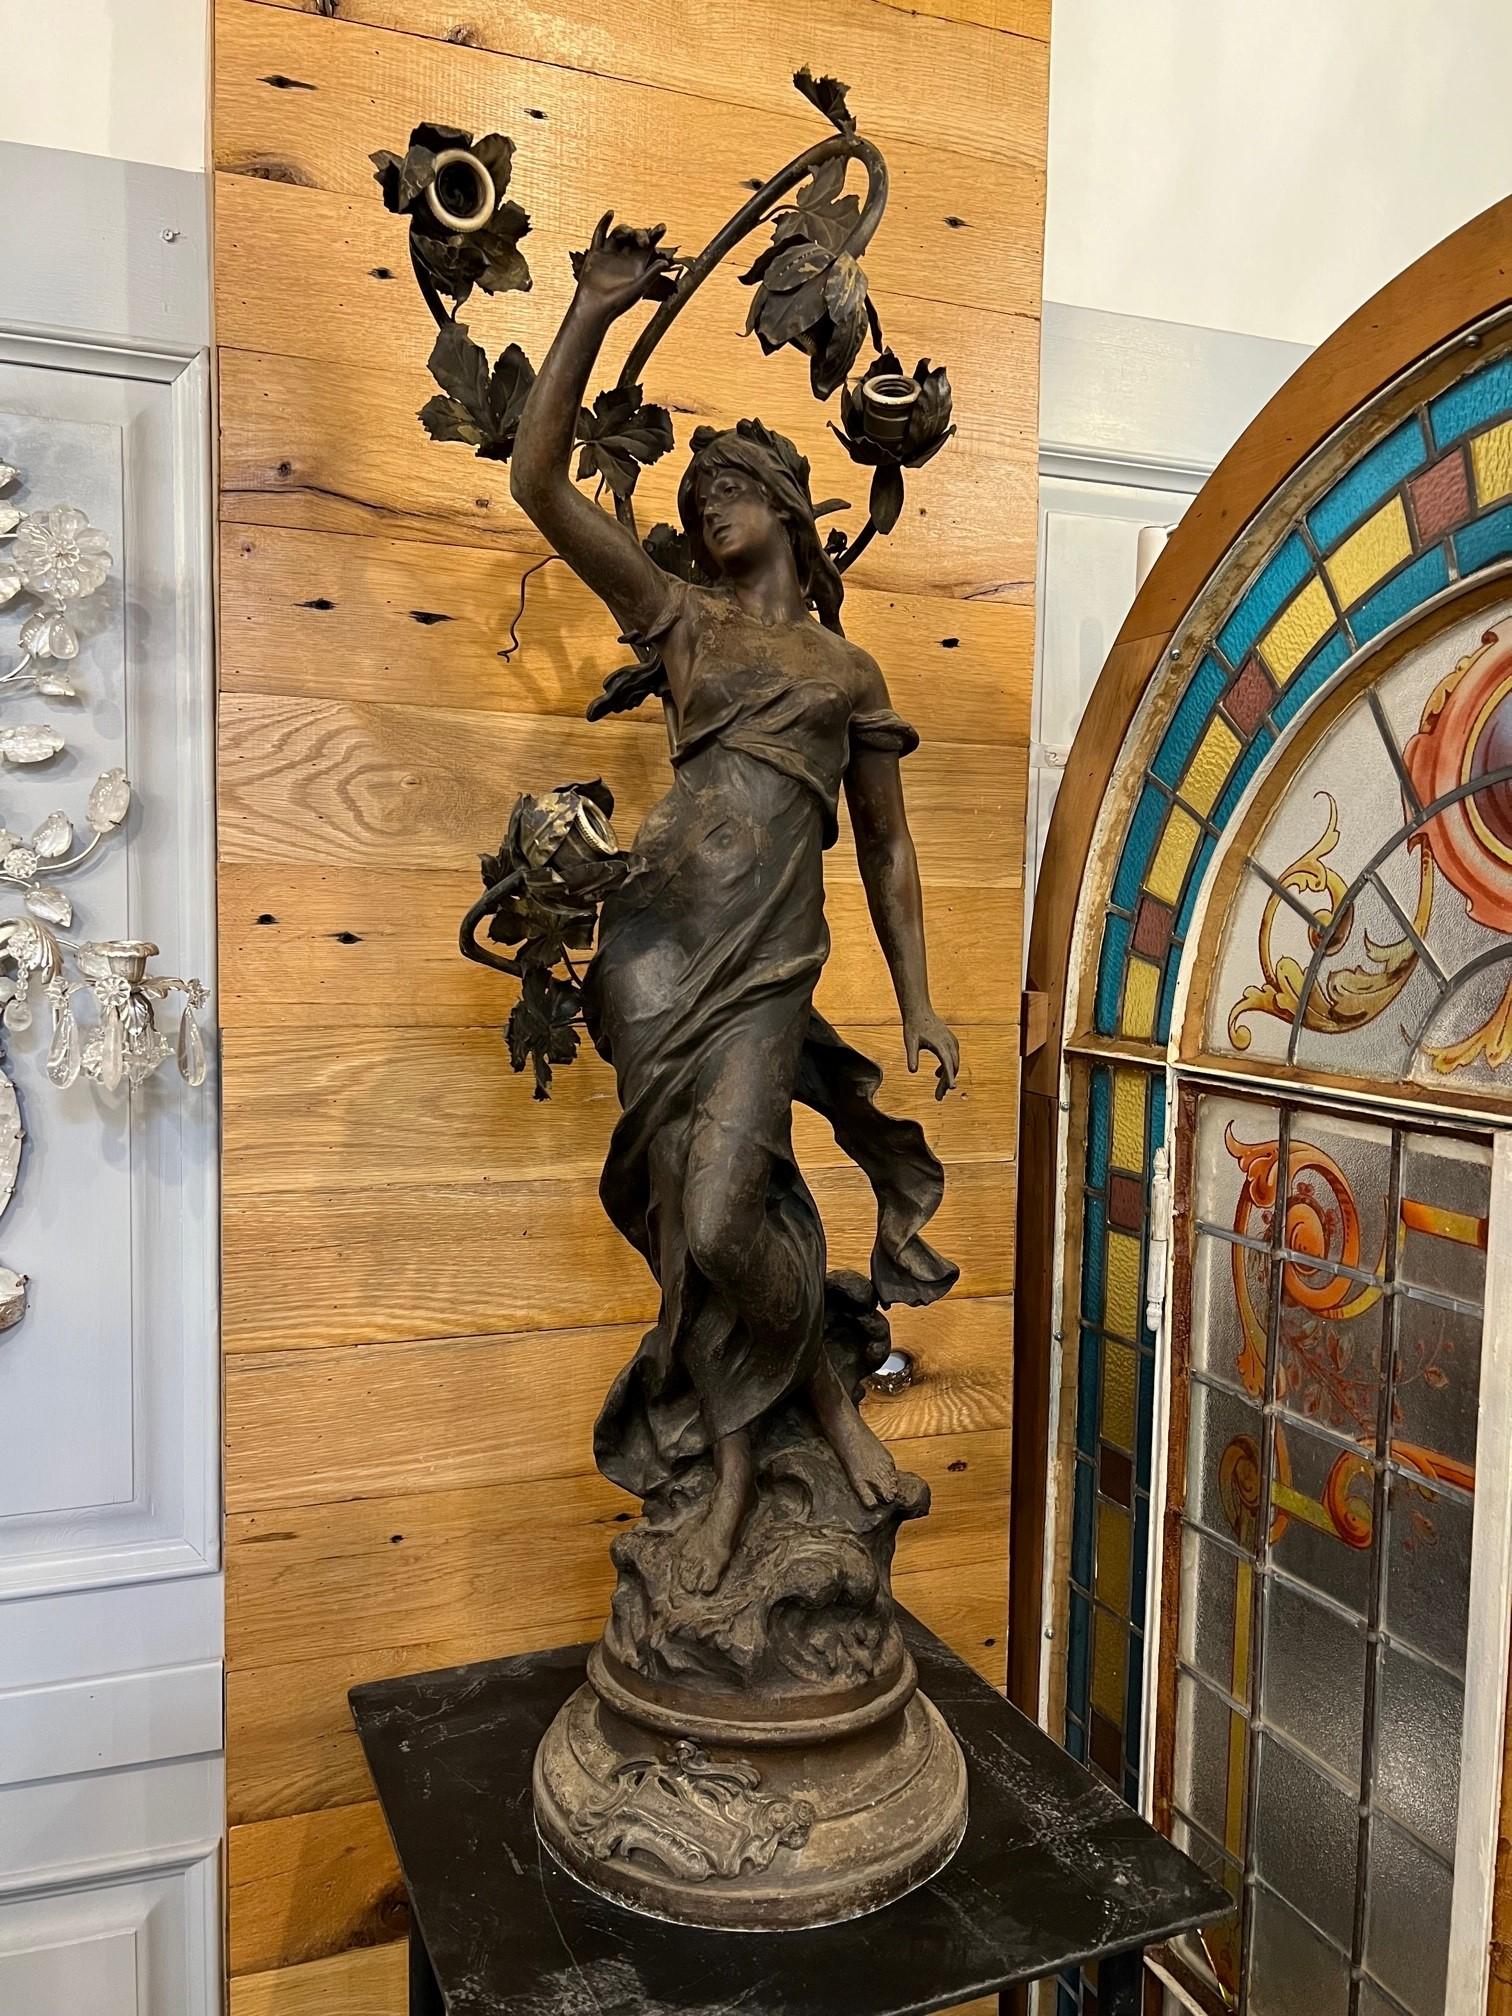 Early 20th century Art Nouveau newel post lamp also known as pillar lights. This light has a beautiful women with her arm raised and four lights. Newel post lights were used to light homes at the bottom of the stairway or along the stair rail to